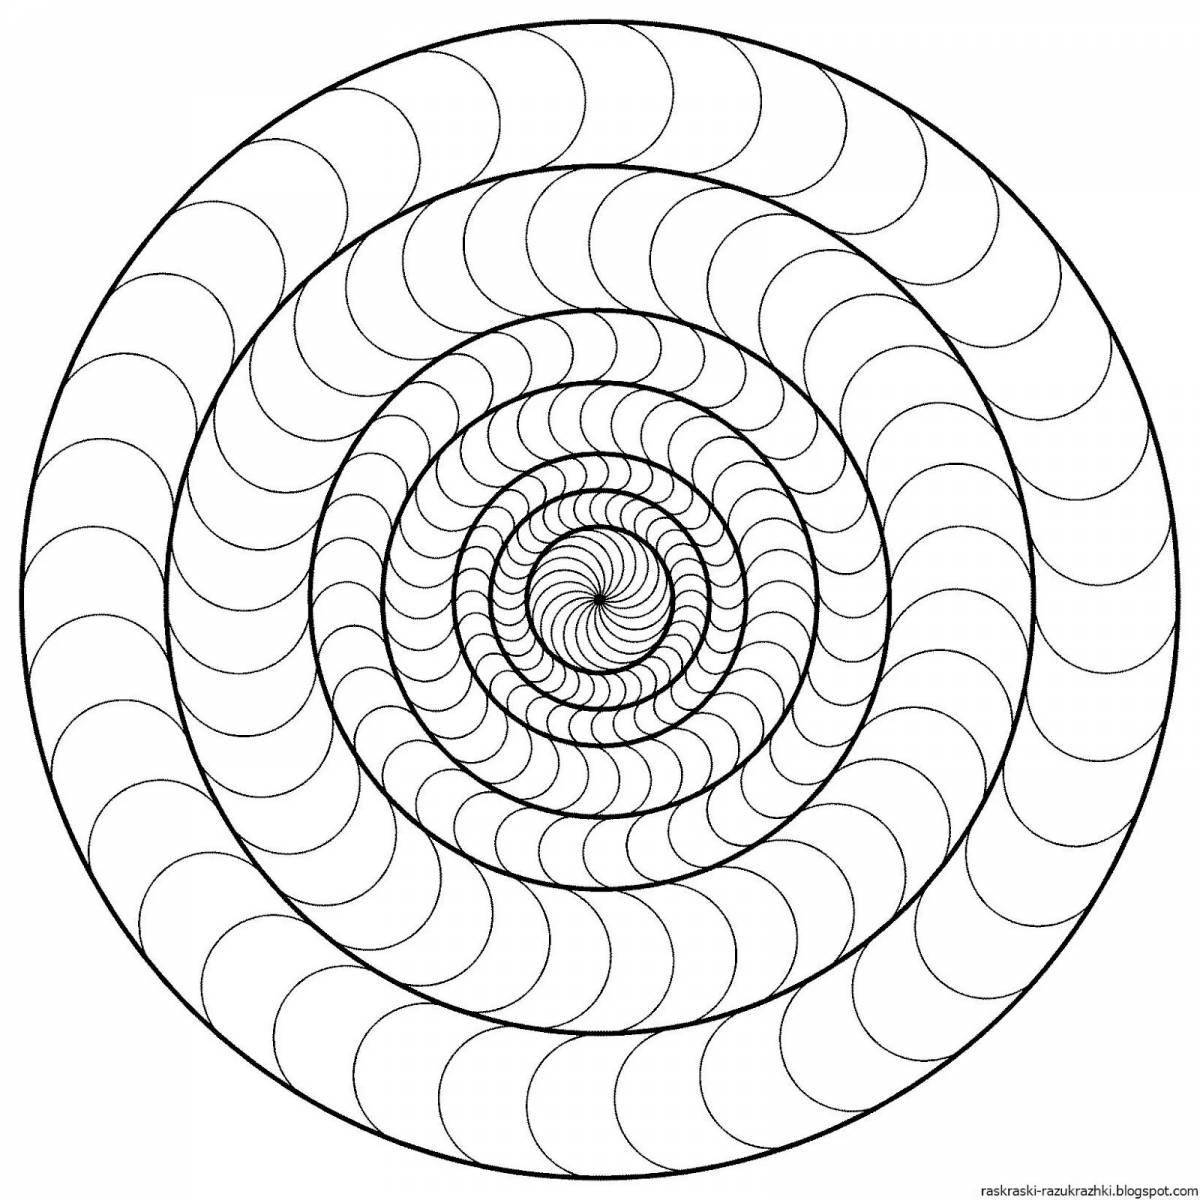 Brilliant creation of spiral coloring